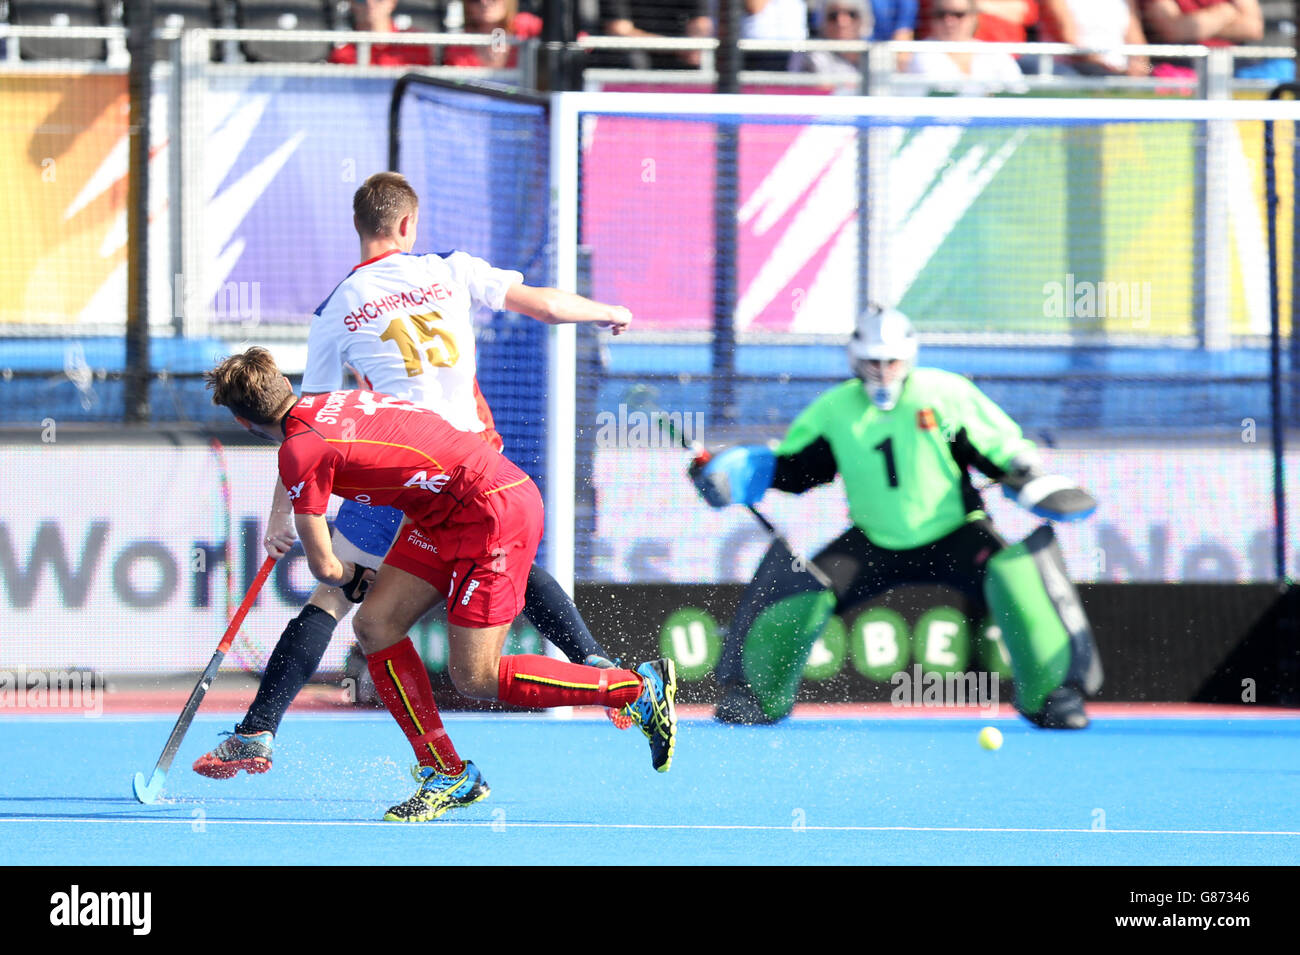 Belgium's Emmanuel Stockbroekx (left) scores his side's sixth goal of the game during the Pool C Classification match at the Lee Valley Hockey and Tennis Centre, London. PRESS ASSOCIATION Photo. Picture date: Saturday August 29, 2015. Photo credit should read: Simon Cooper/PA Wire Stock Photo